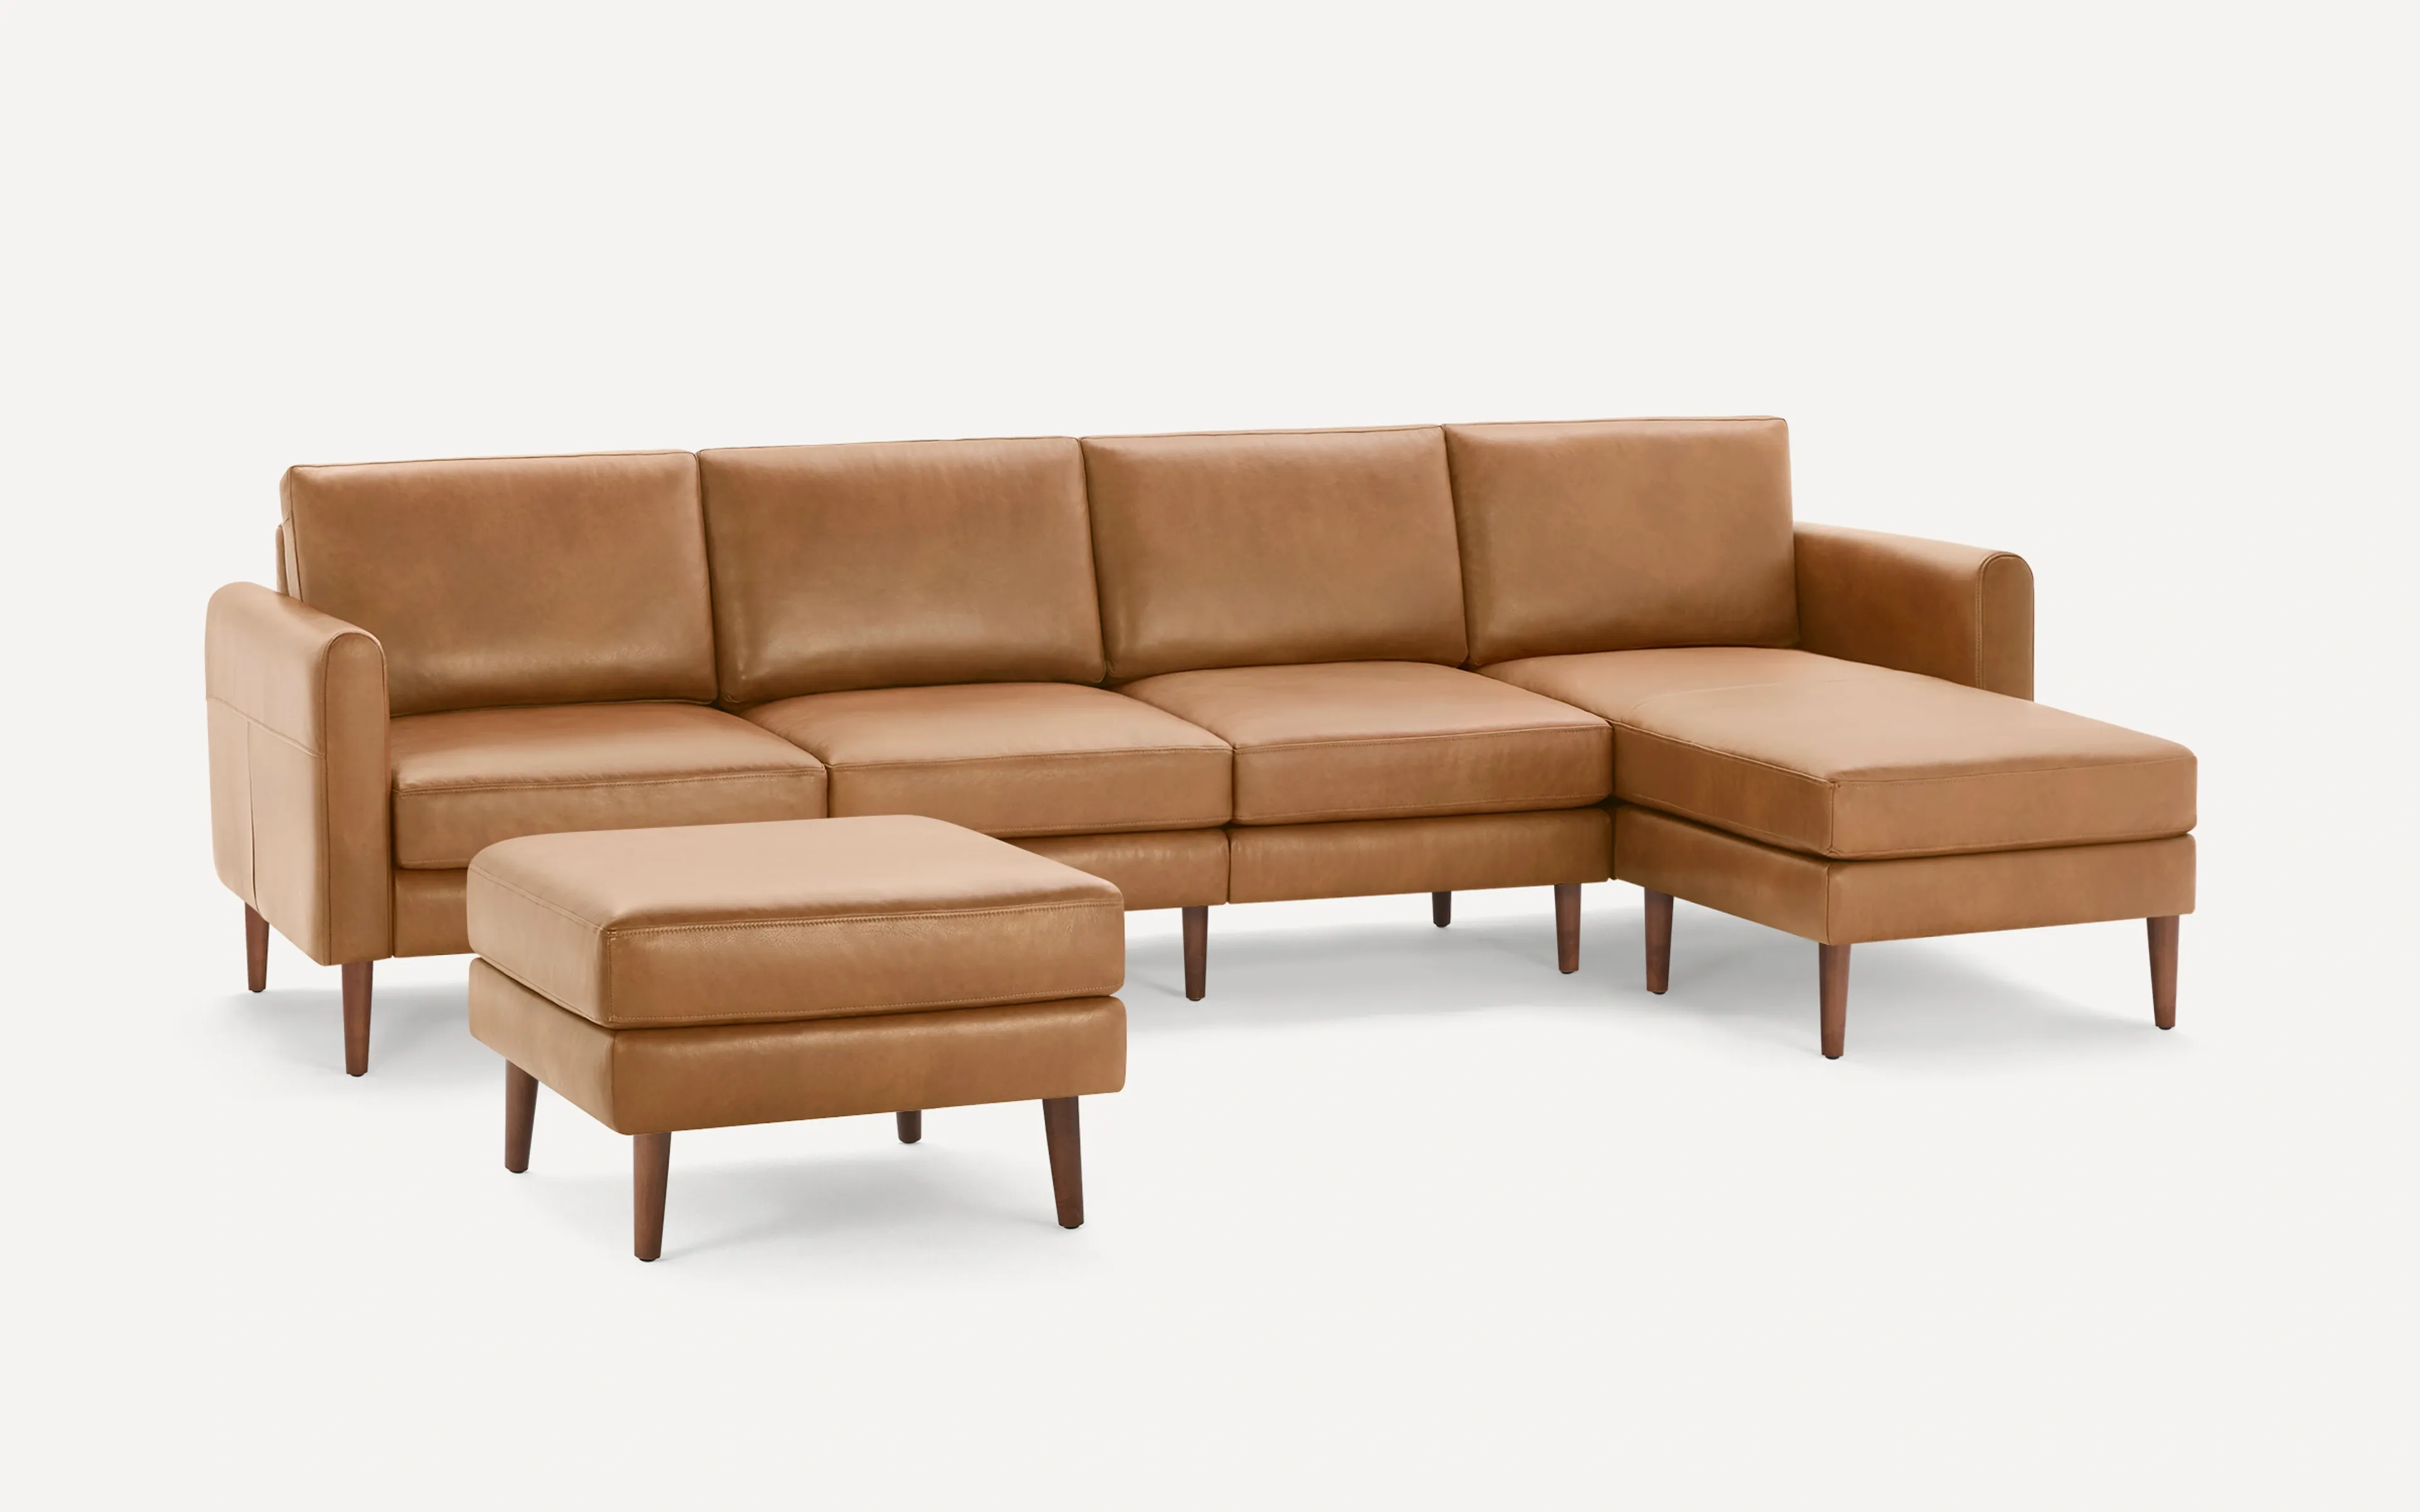 Original Nomad Chaise King Sofa in Camel Leather